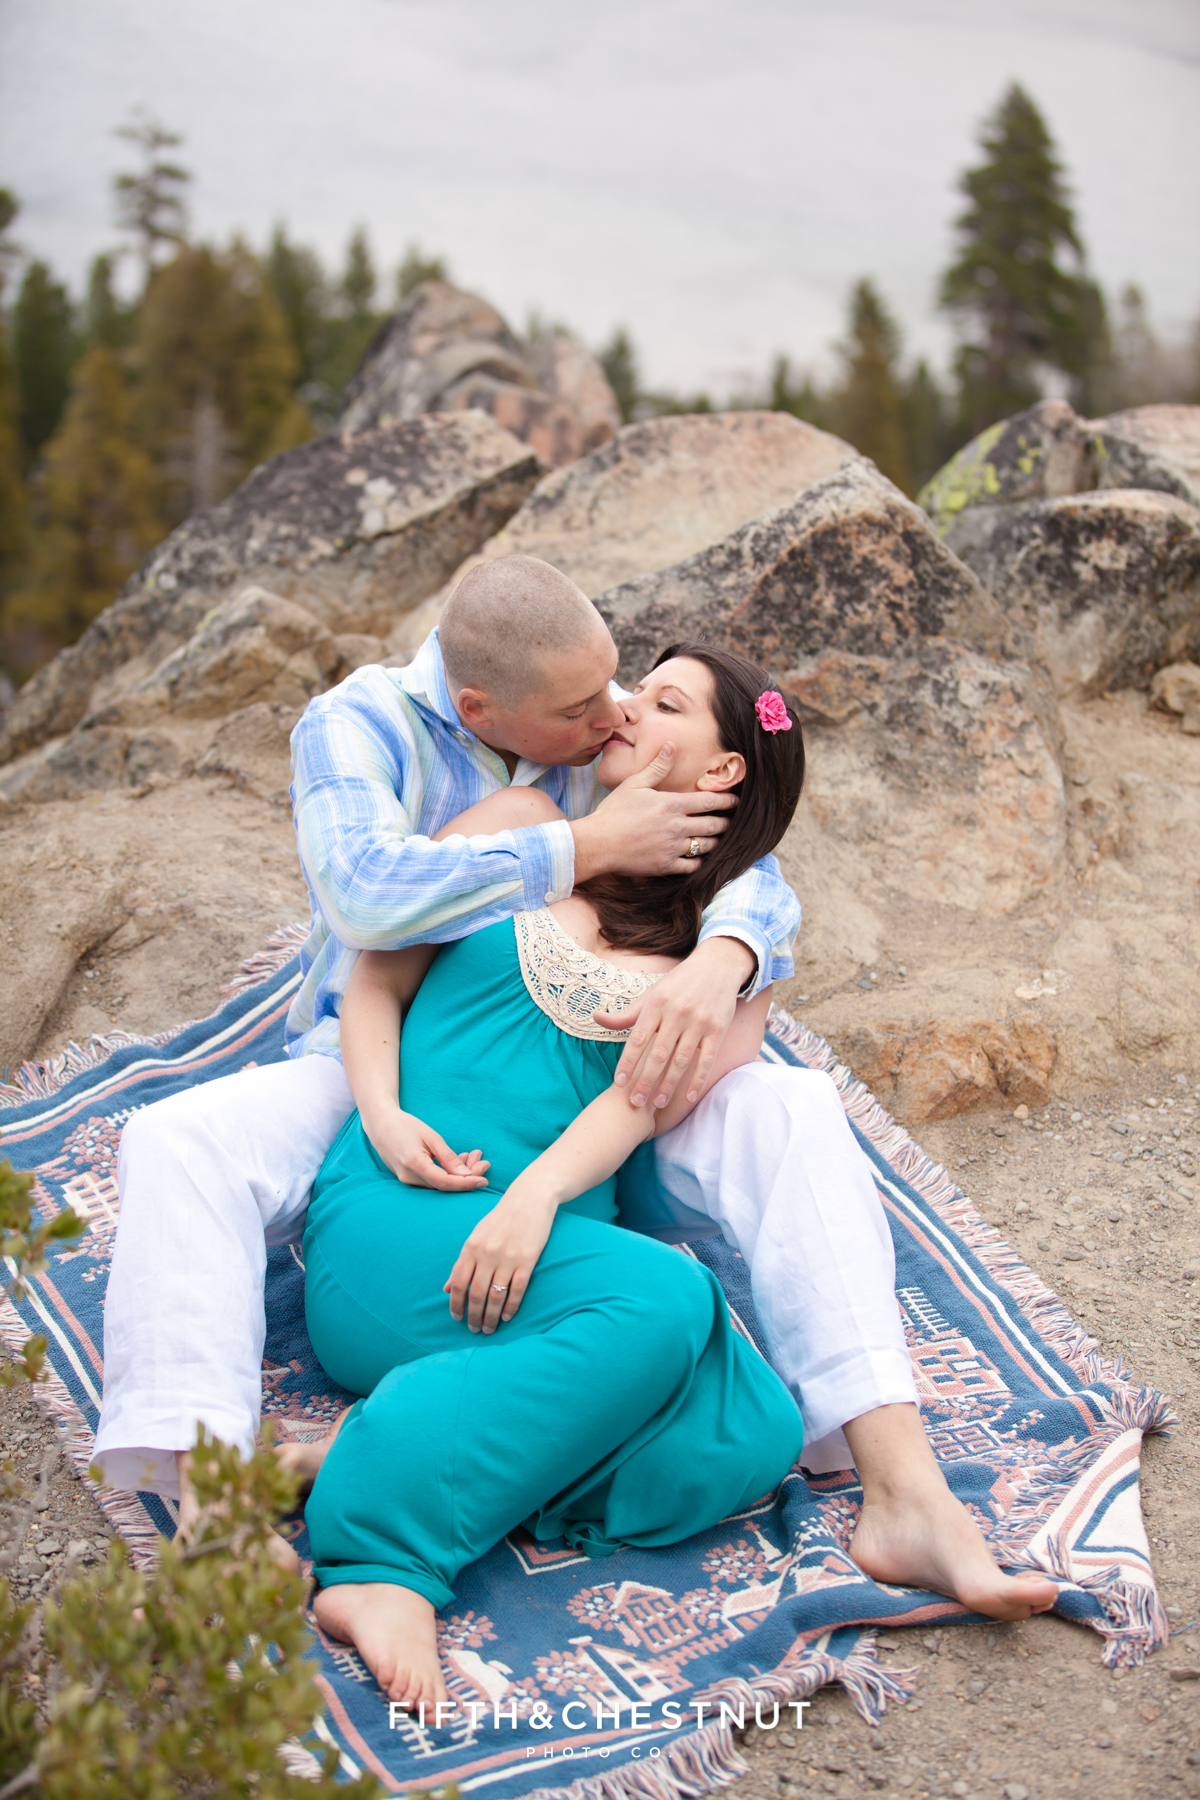 Eagle Falls Portraits of engaged couple in Spring by Lake Tahoe Wedding Photographer